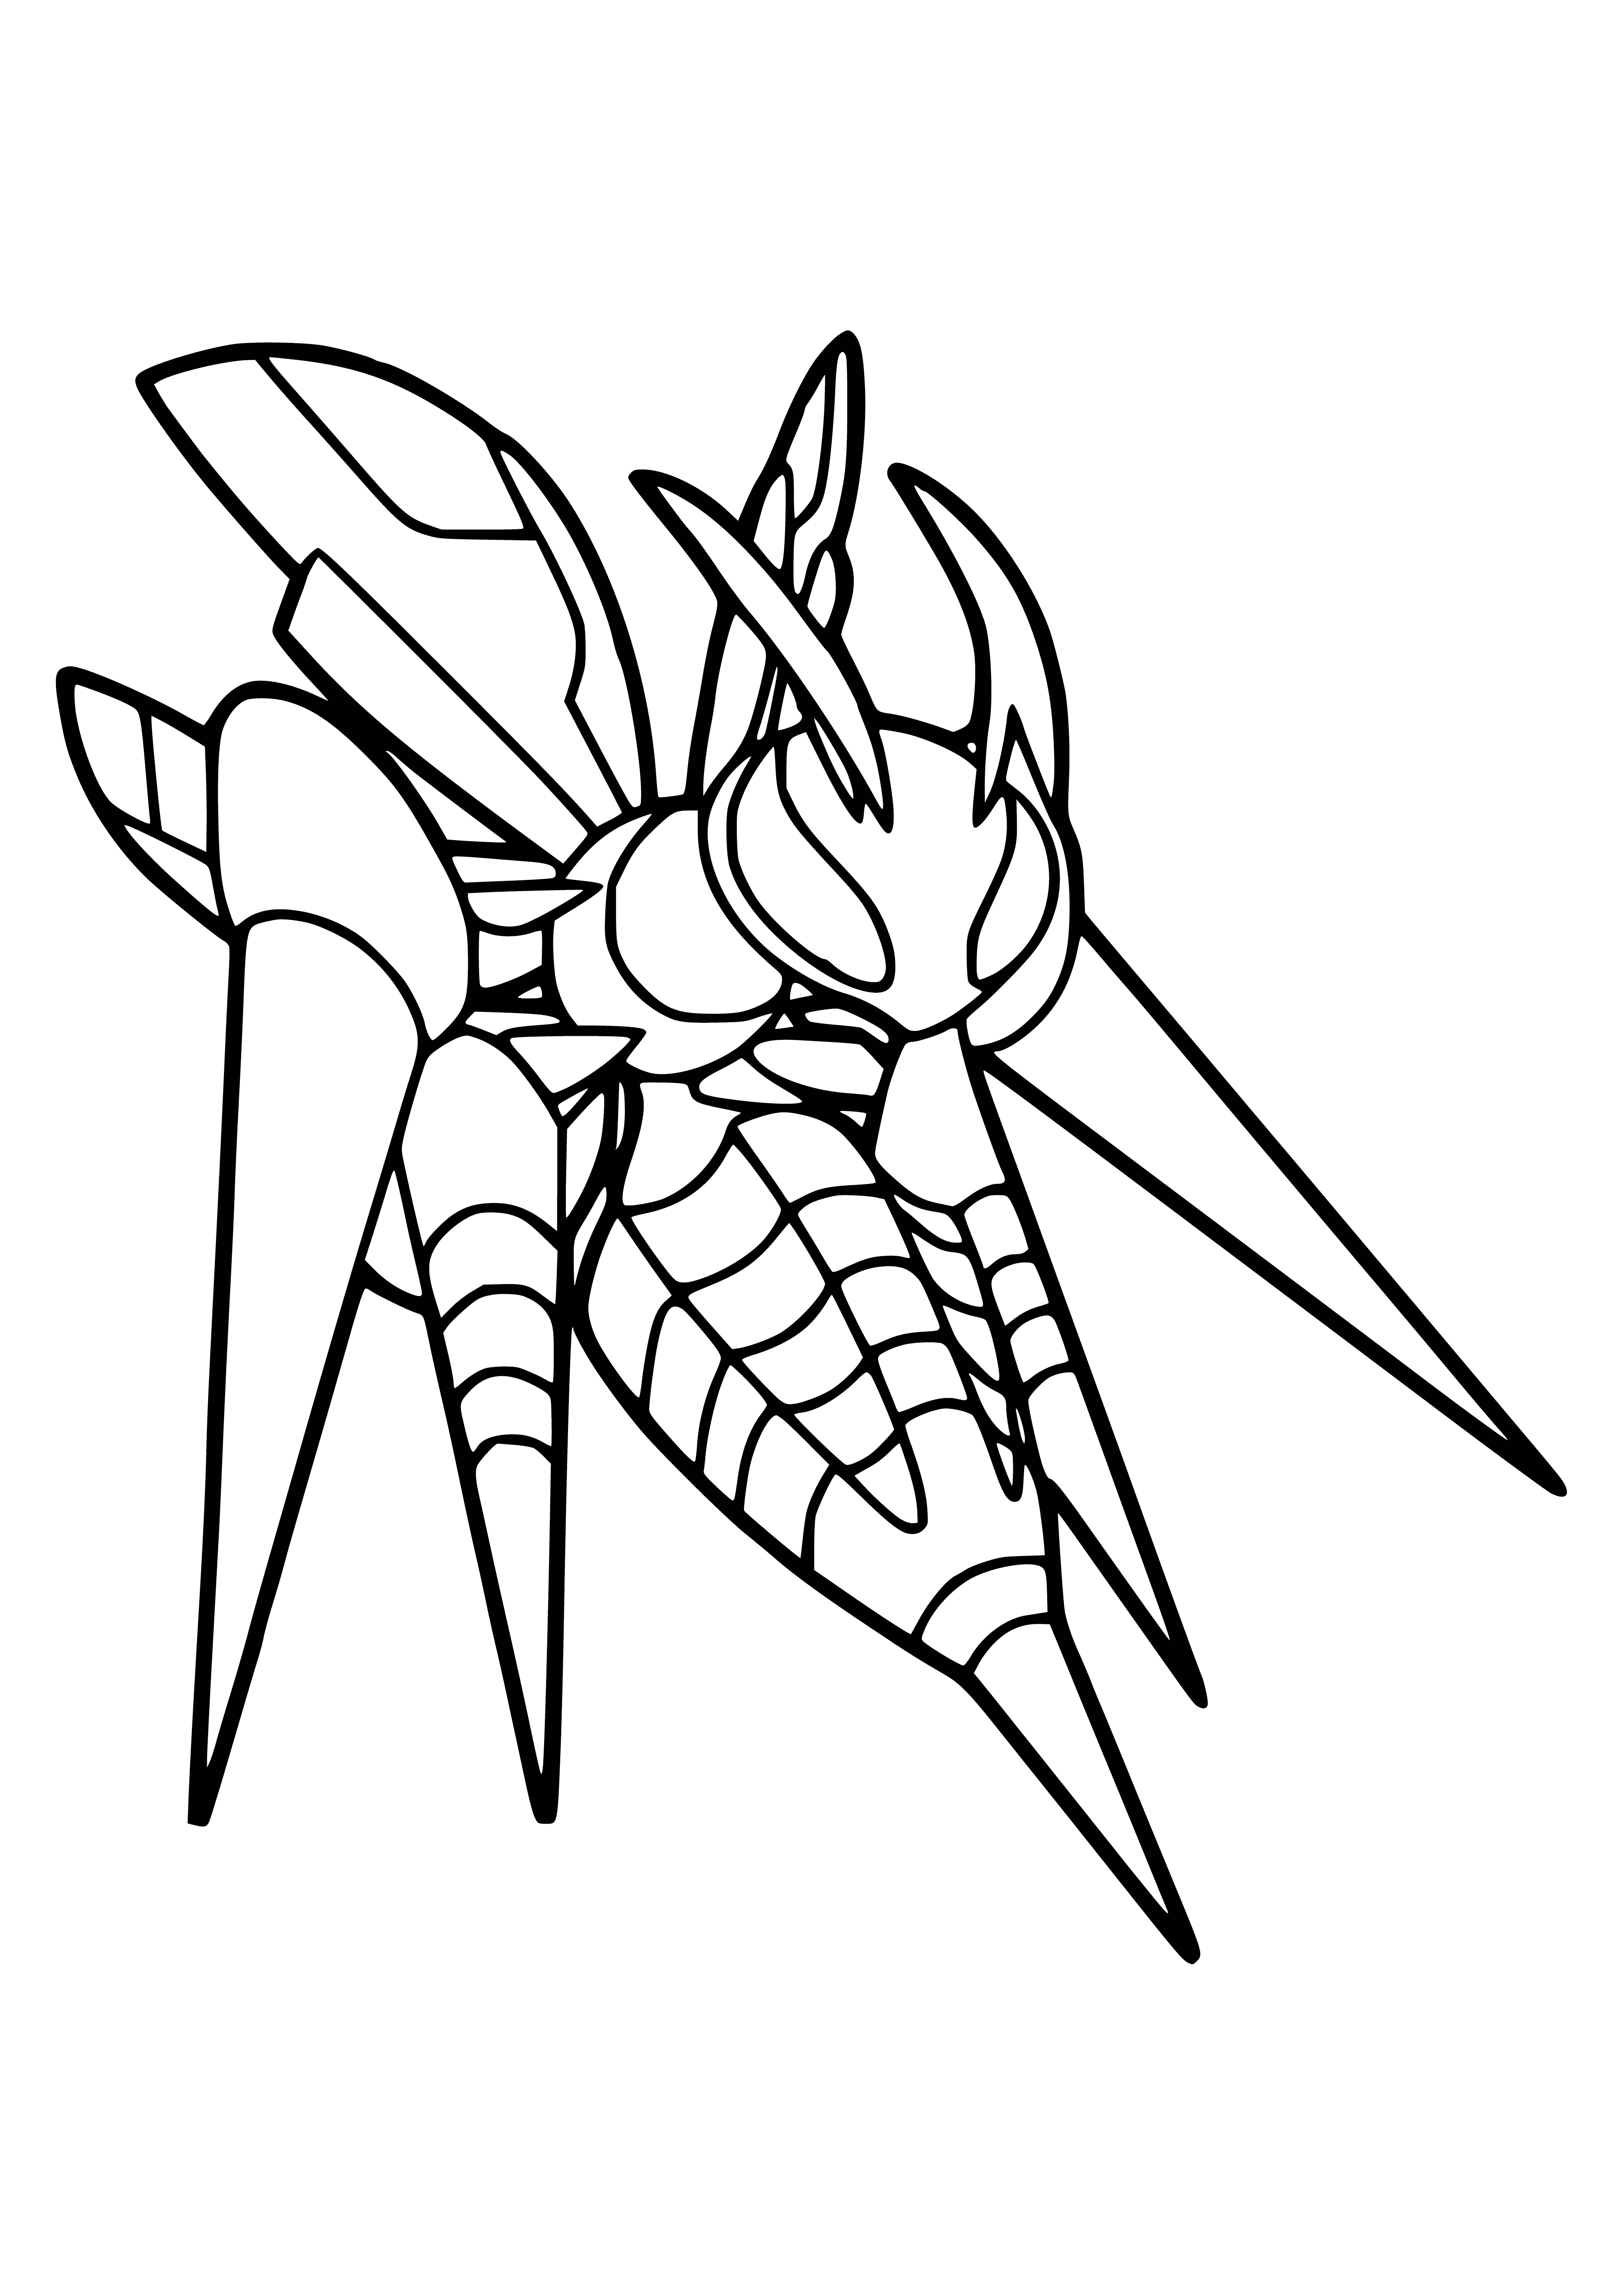 coloring page: A Beedrill Mega Evolved with two large and two small stingers, black abdomen, yellow/black stripes and large black wings with spots. Legs black with yellow stripes. #Pokemon